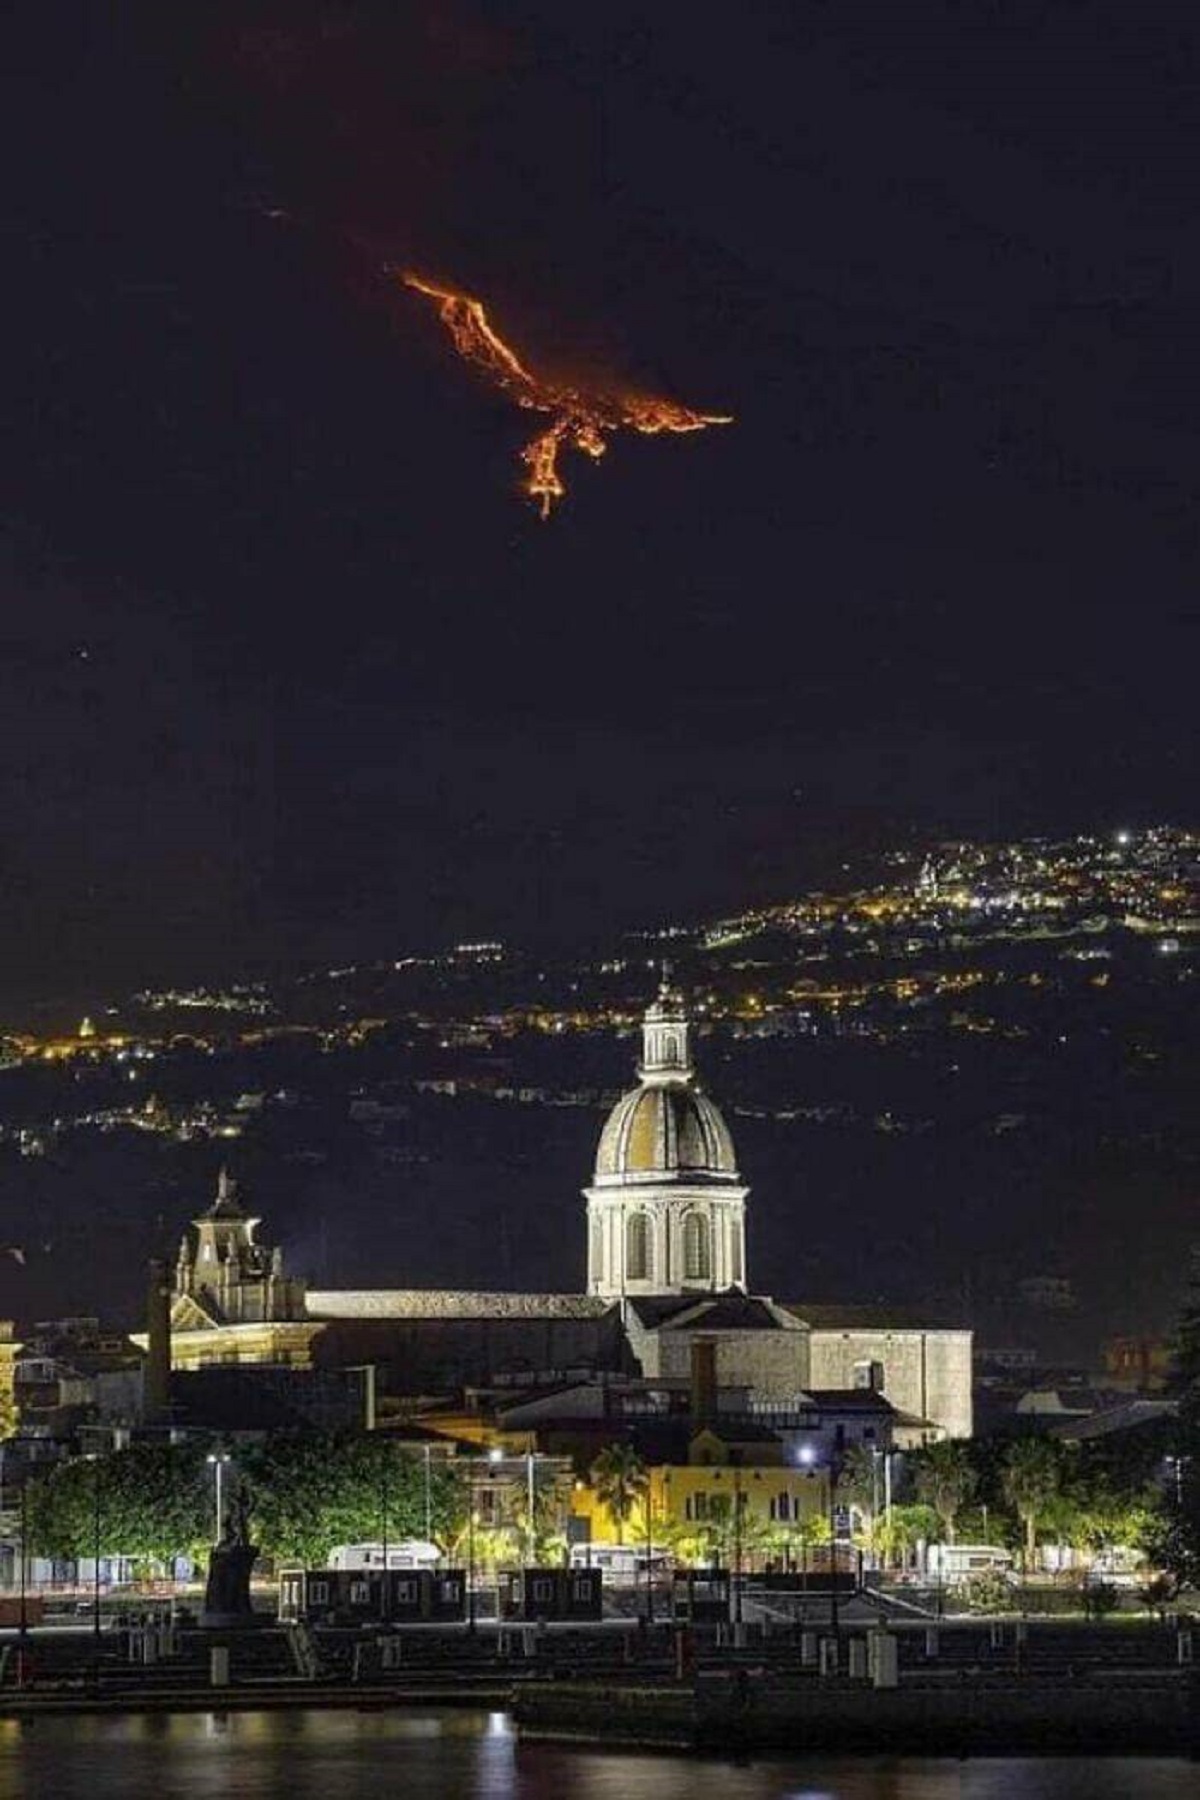 "Eruption On Mount Etna (Sicily) Gives The Illusion Of A Phoenix In The Sky"